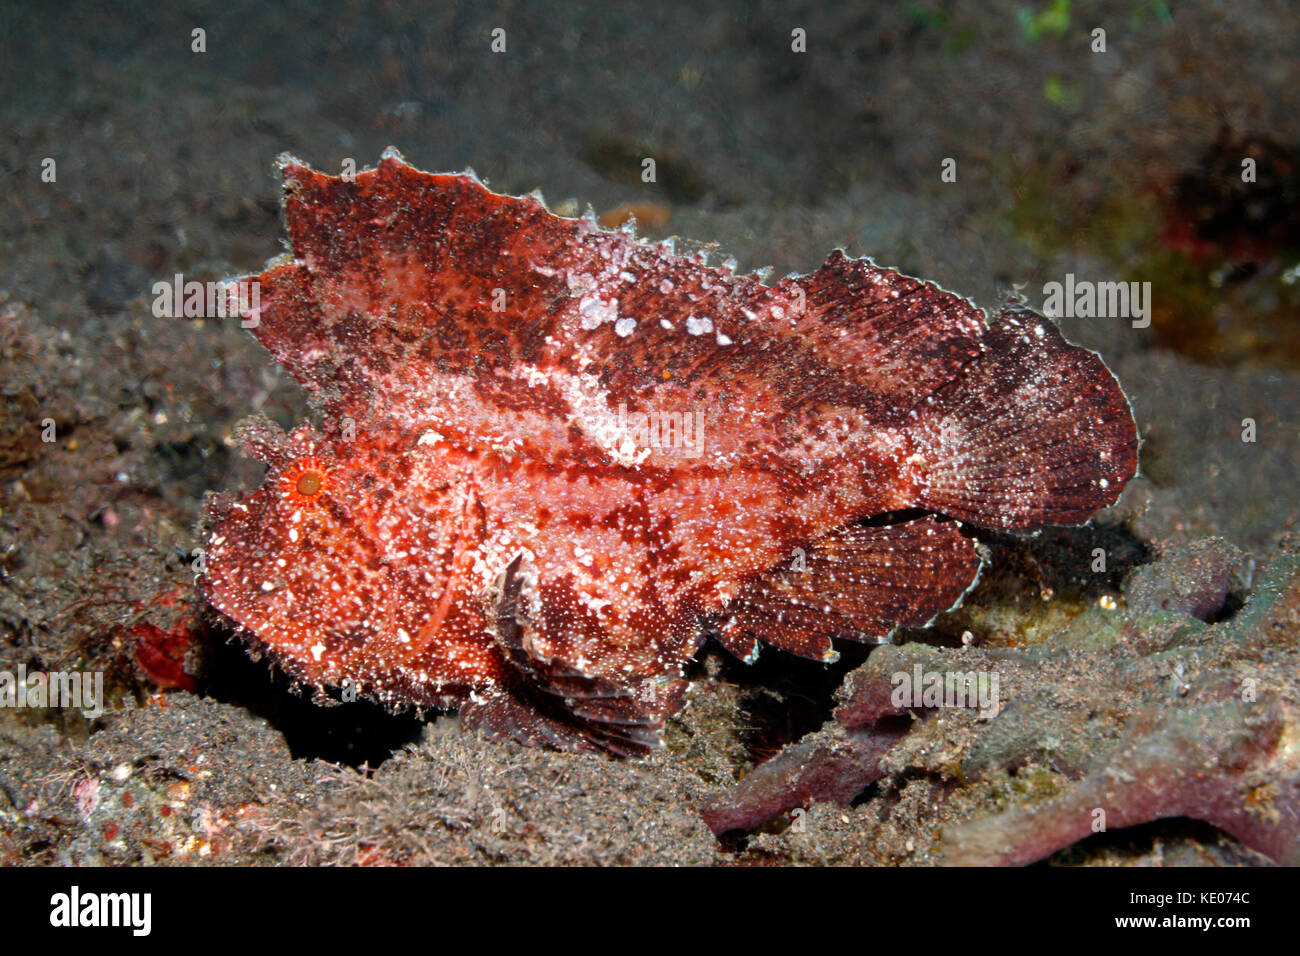 Leaf Scorpionfish, Taenianotus triacanthus, red variation. Also known as a Paperfish and Paper Scorpionfish. Tulamben, Bali, Indonesia. Bali Sea, Indi Stock Photo